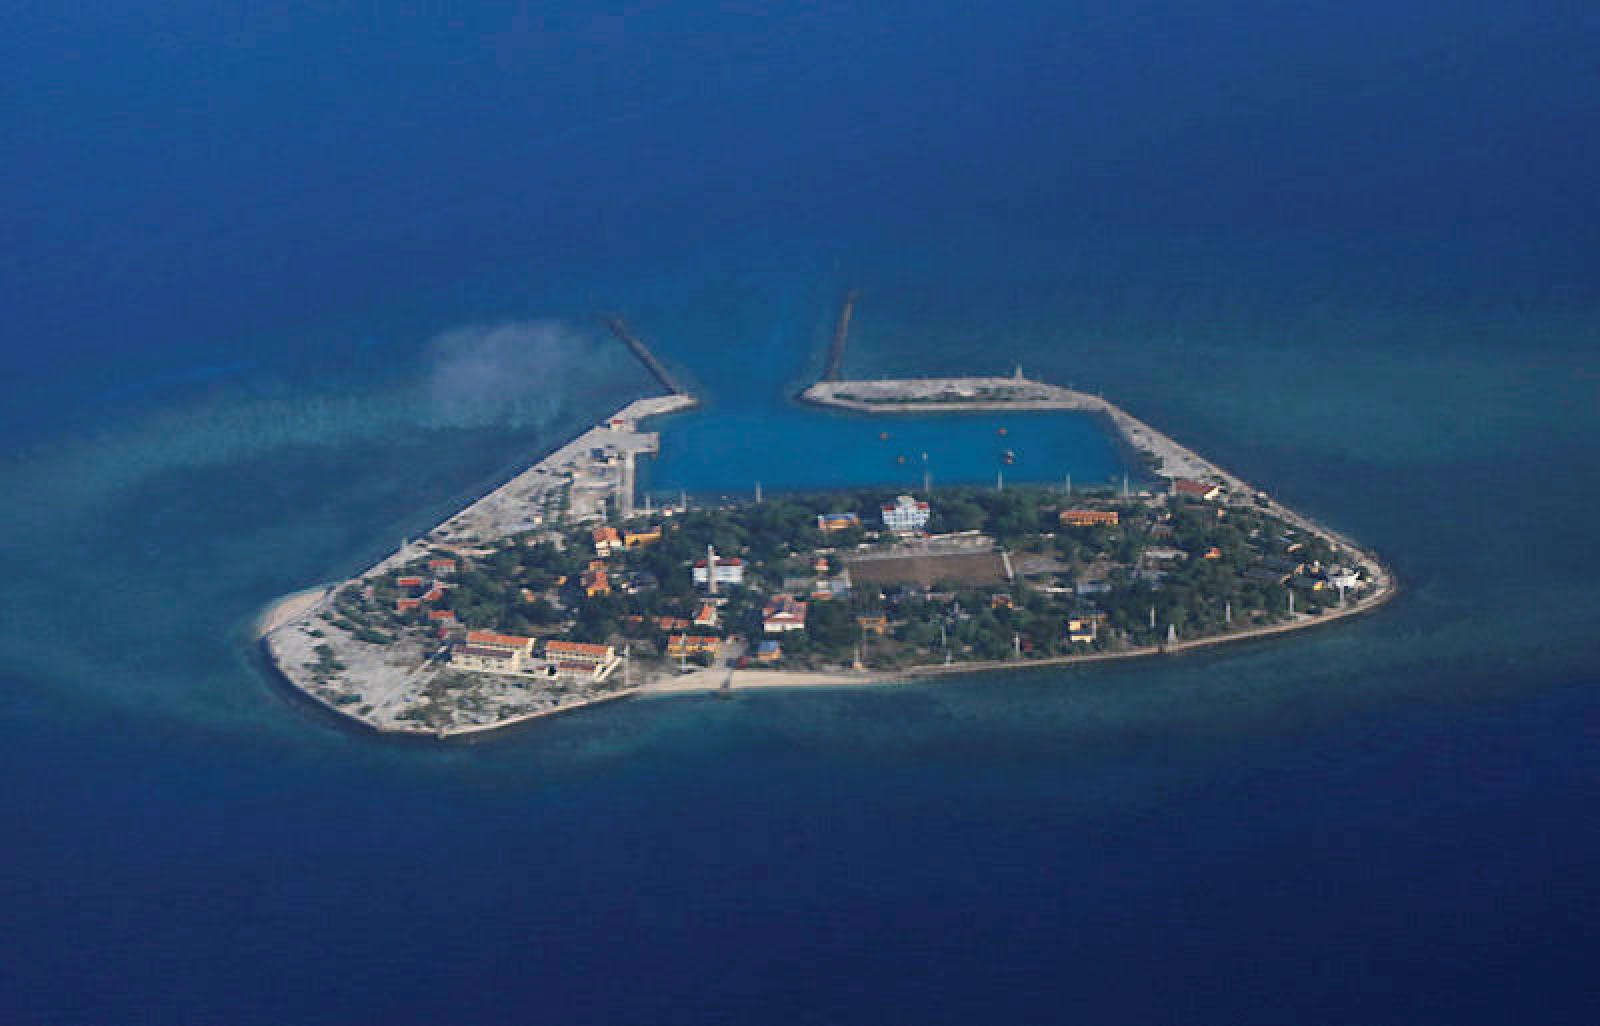 An aerial view of Southwest Cay, or Pugad Island, one of the Spratly Islands in the South China Sea that’s controlled by Vietnam. Photo: Reuters